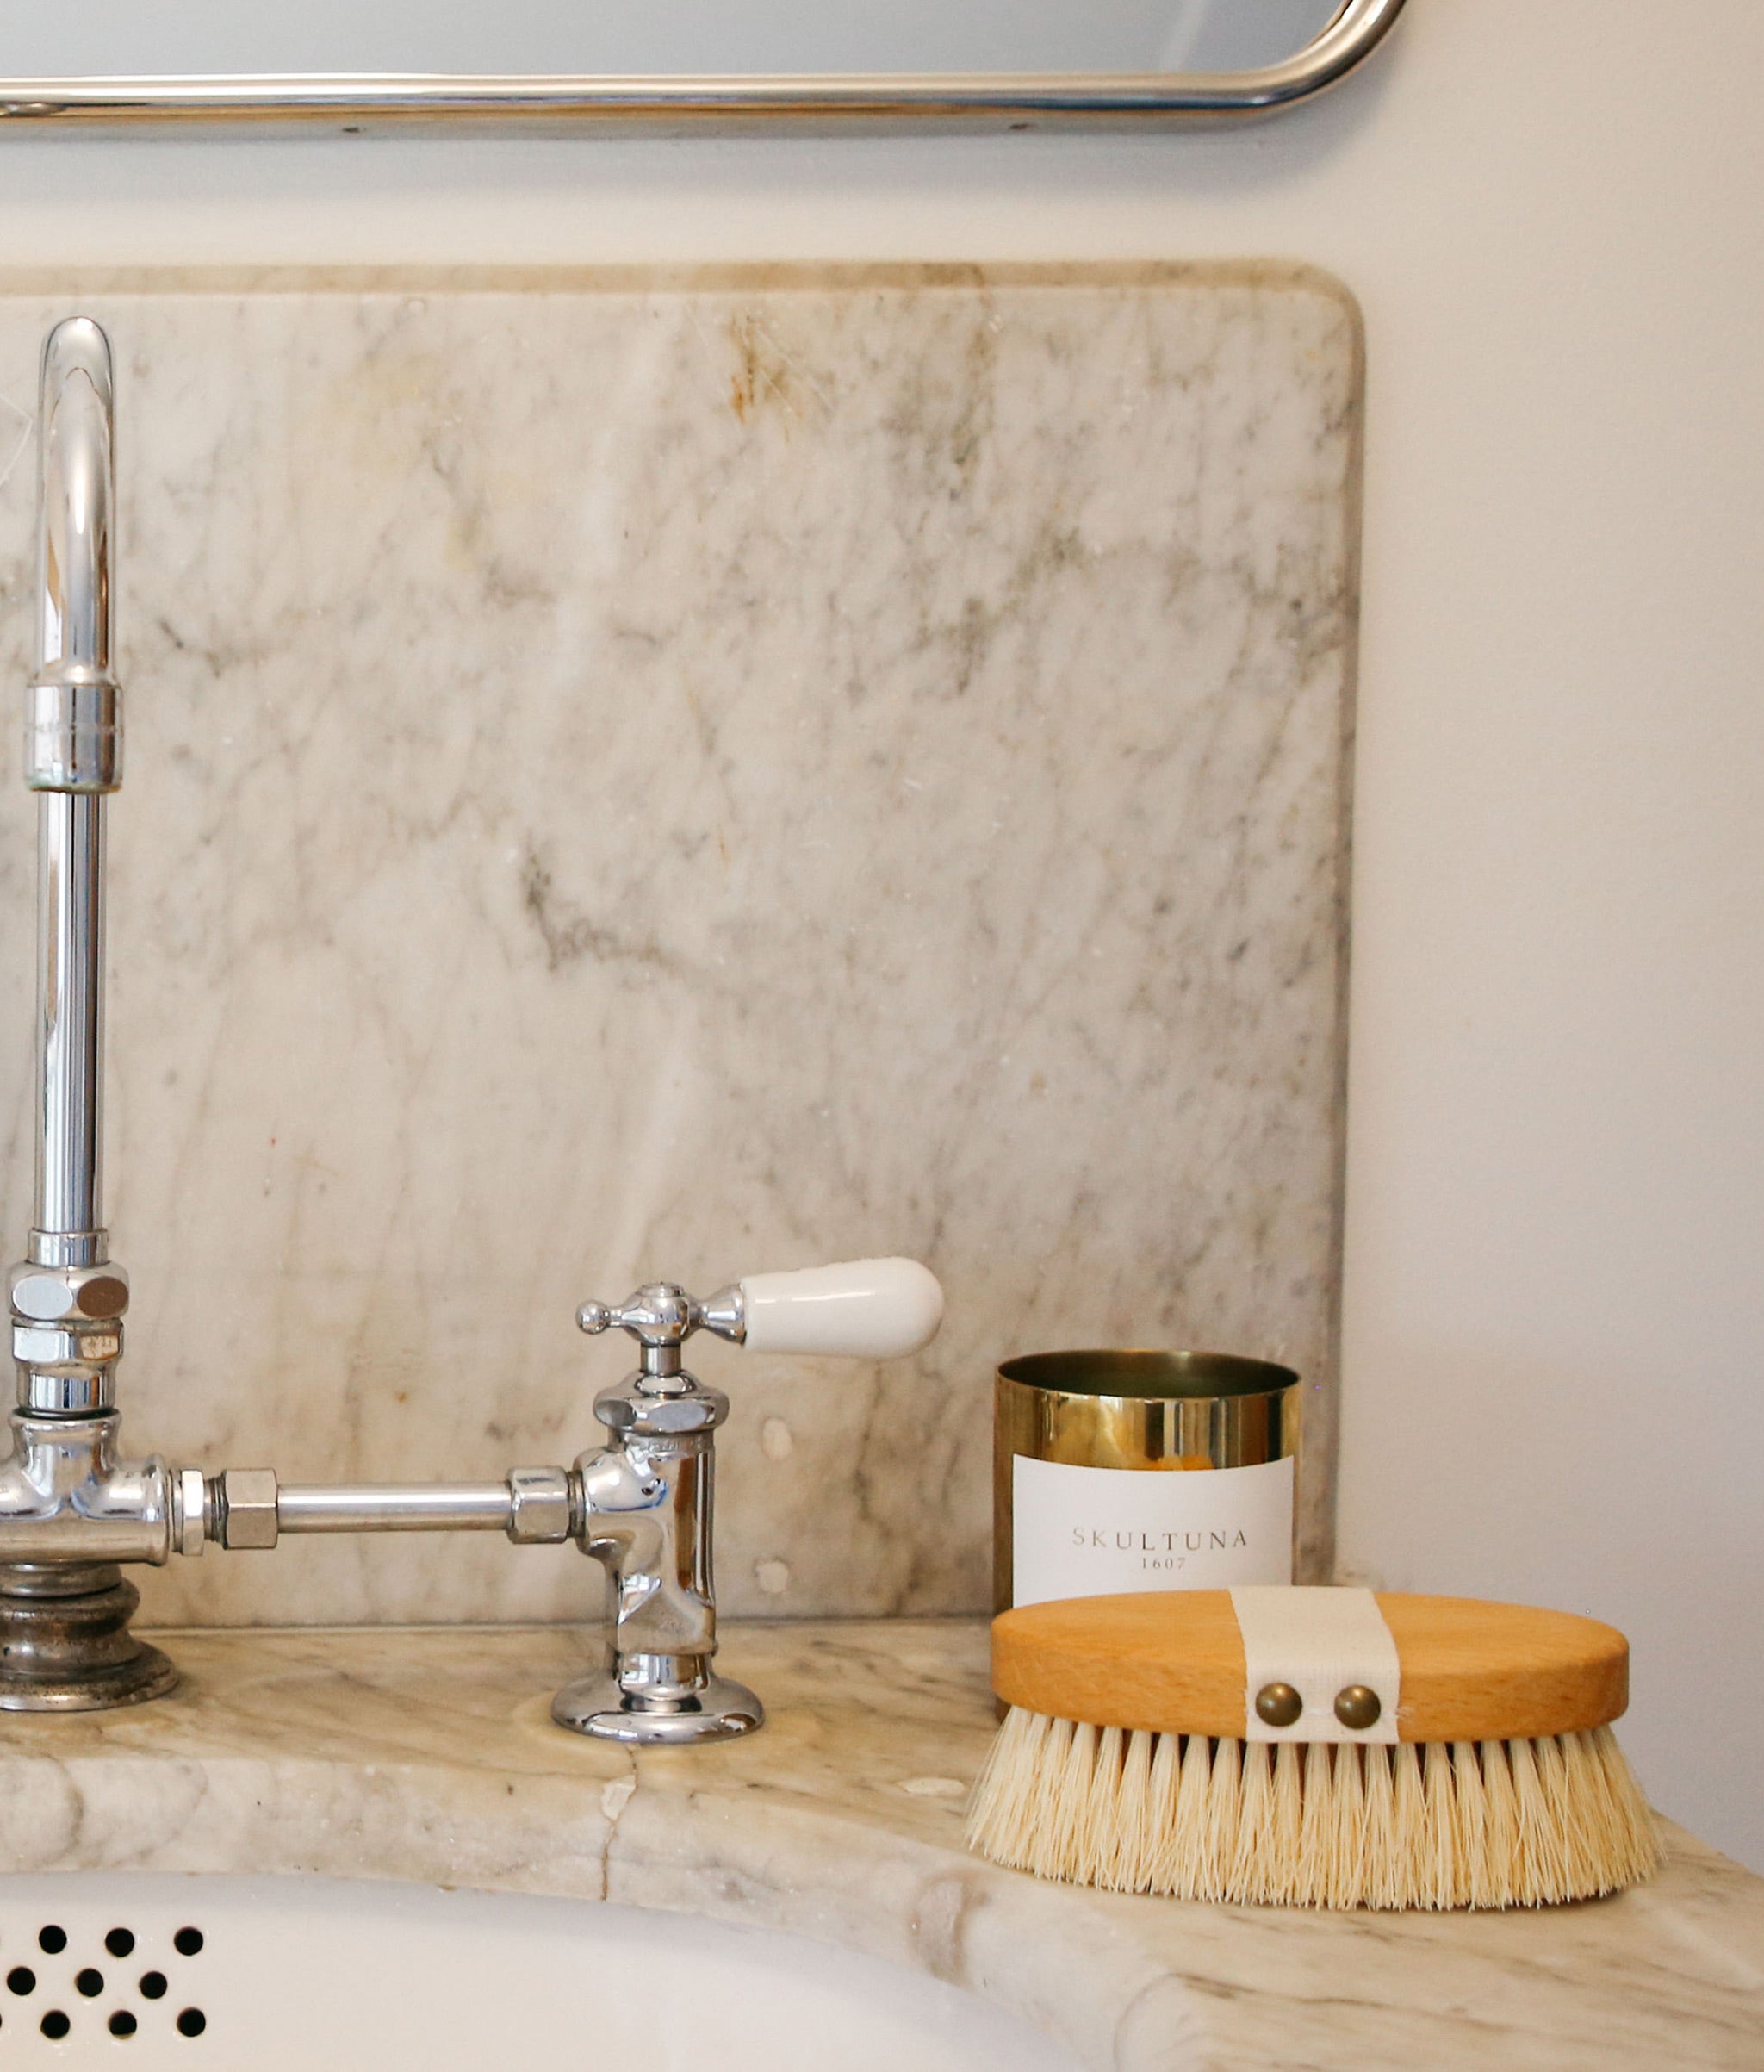 Massage Brush sits on marble sink with silver faucet and gold candle.